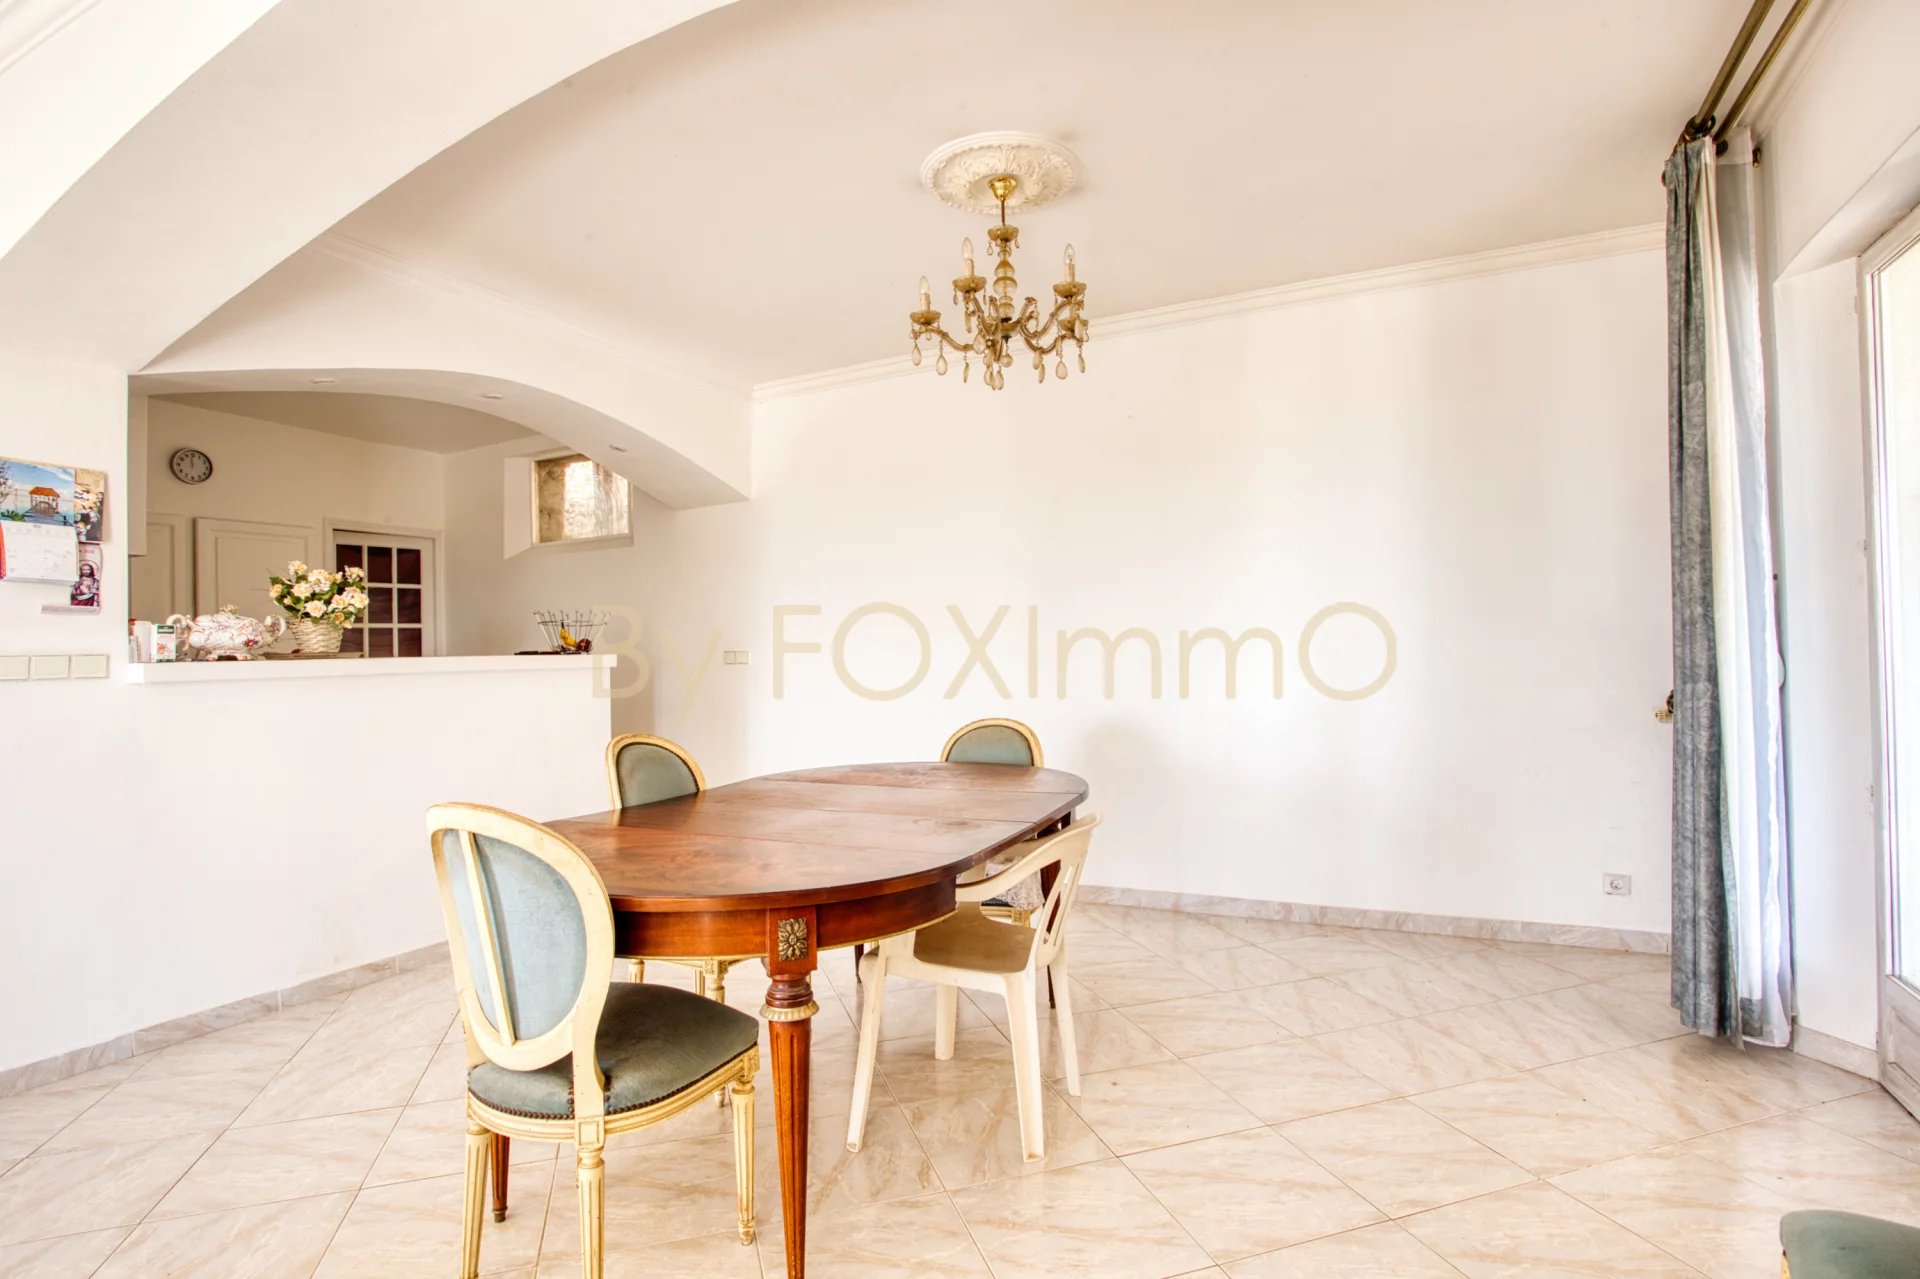 5-ROOM VILLA - PANORAMIC SEA VIEW - ABSOLUTE PEACE AND QUIET - CABRIS